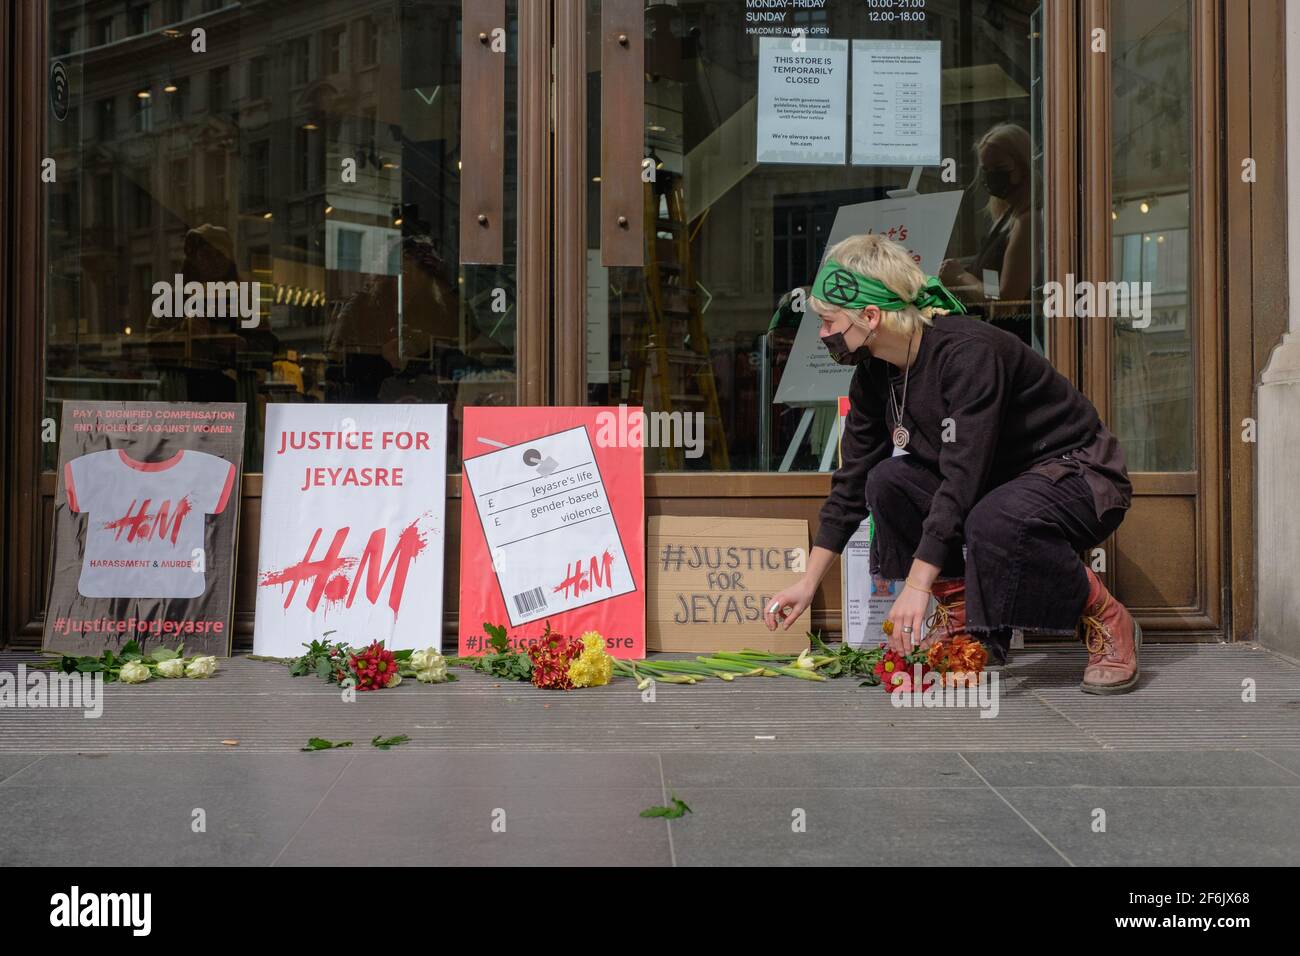 London, UK. April 1, 2021. Extinction rebellion protesters drop flower in  front of H&M in memory of JEYASRE KATHIRAVEL an Indian woman who was raped  and murdered while working in exploitative garment